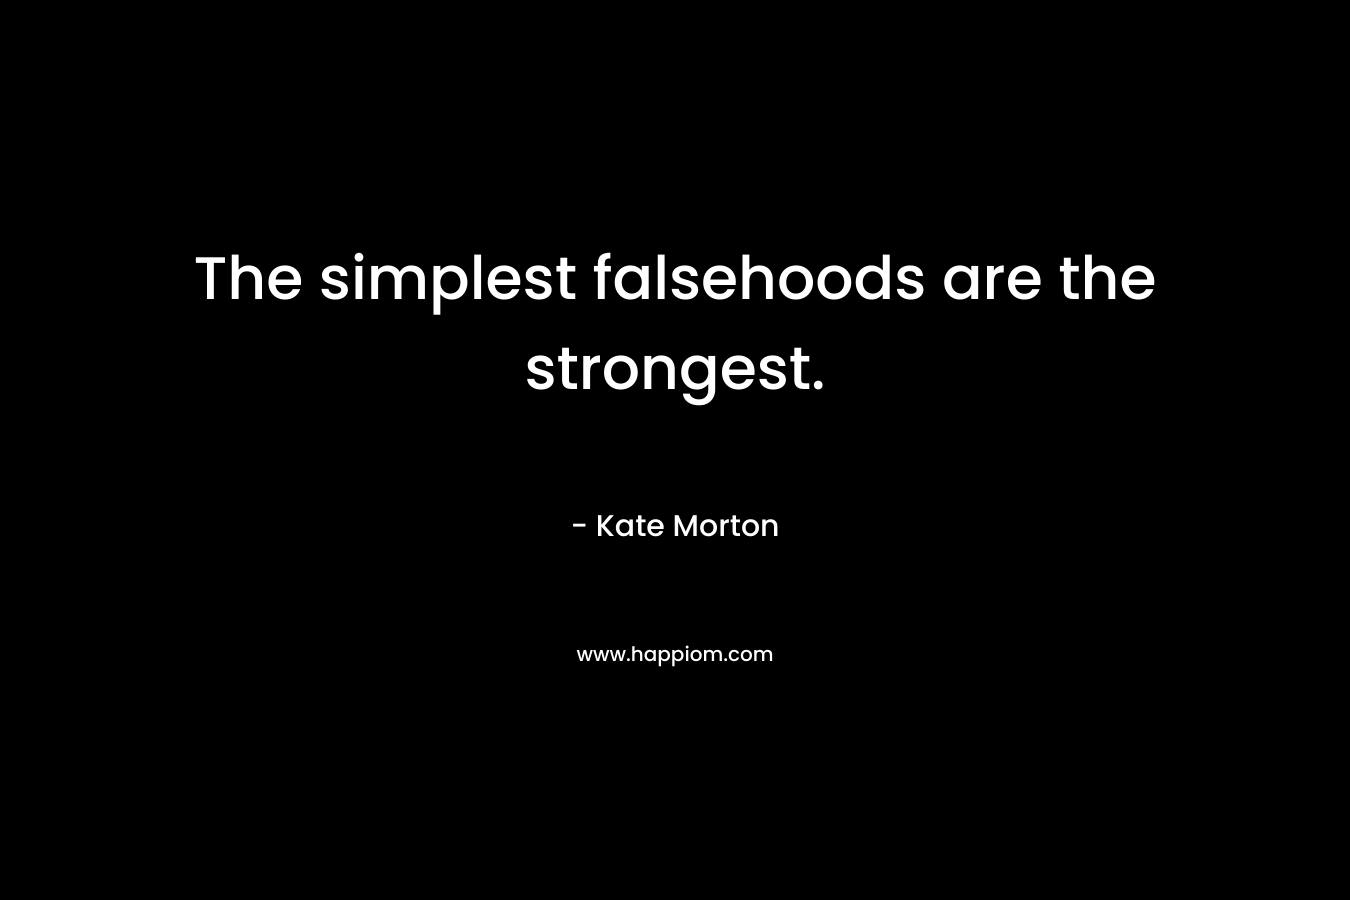 The simplest falsehoods are the strongest. – Kate Morton